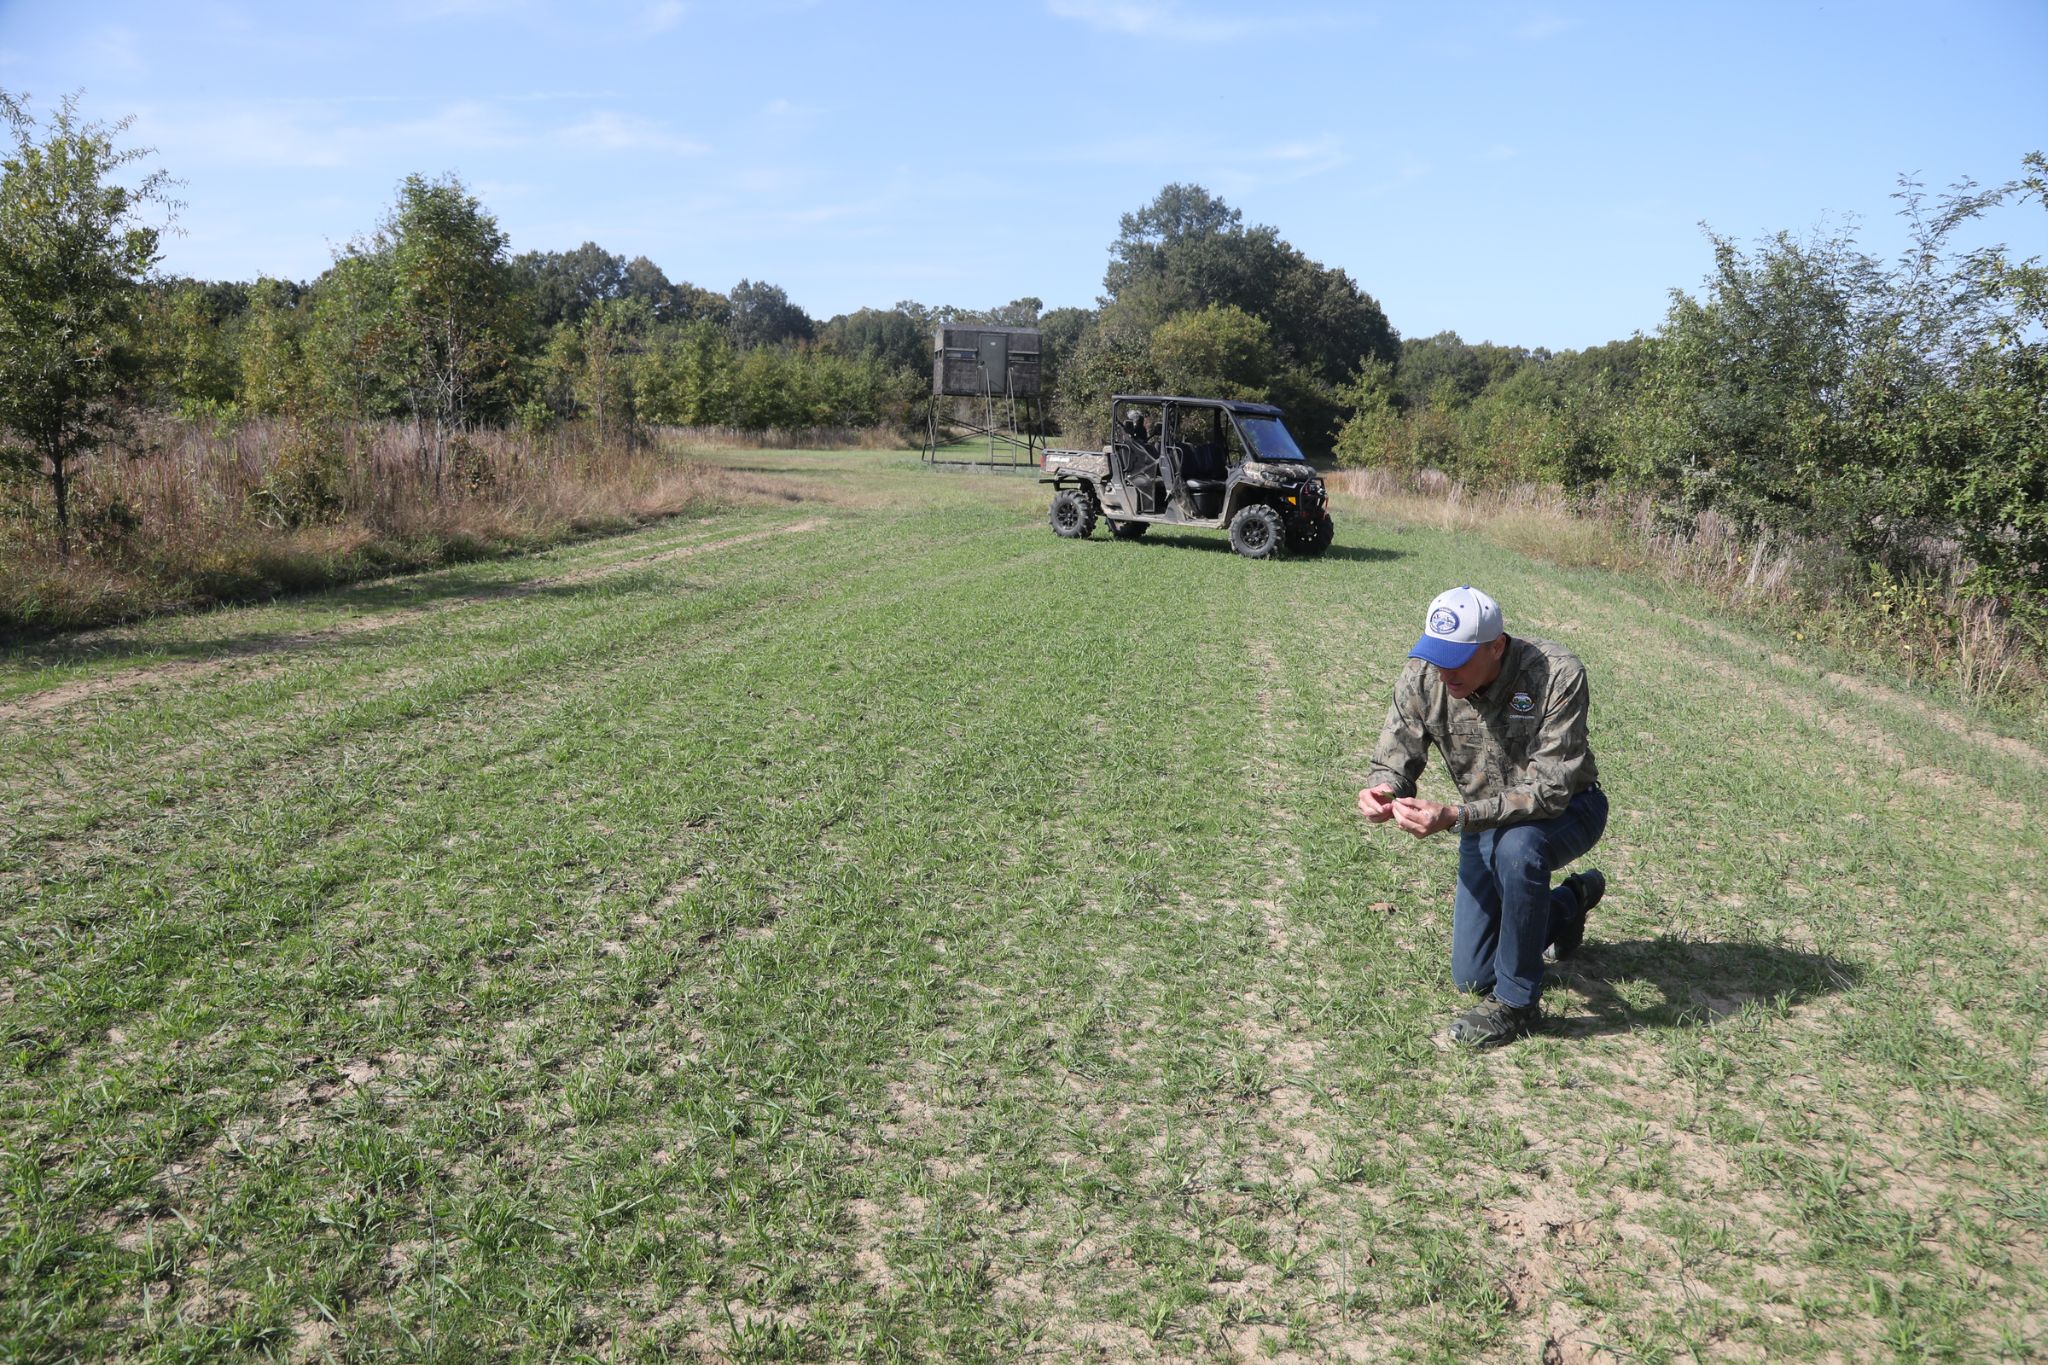 New partnership putting more hands to work for deer management in